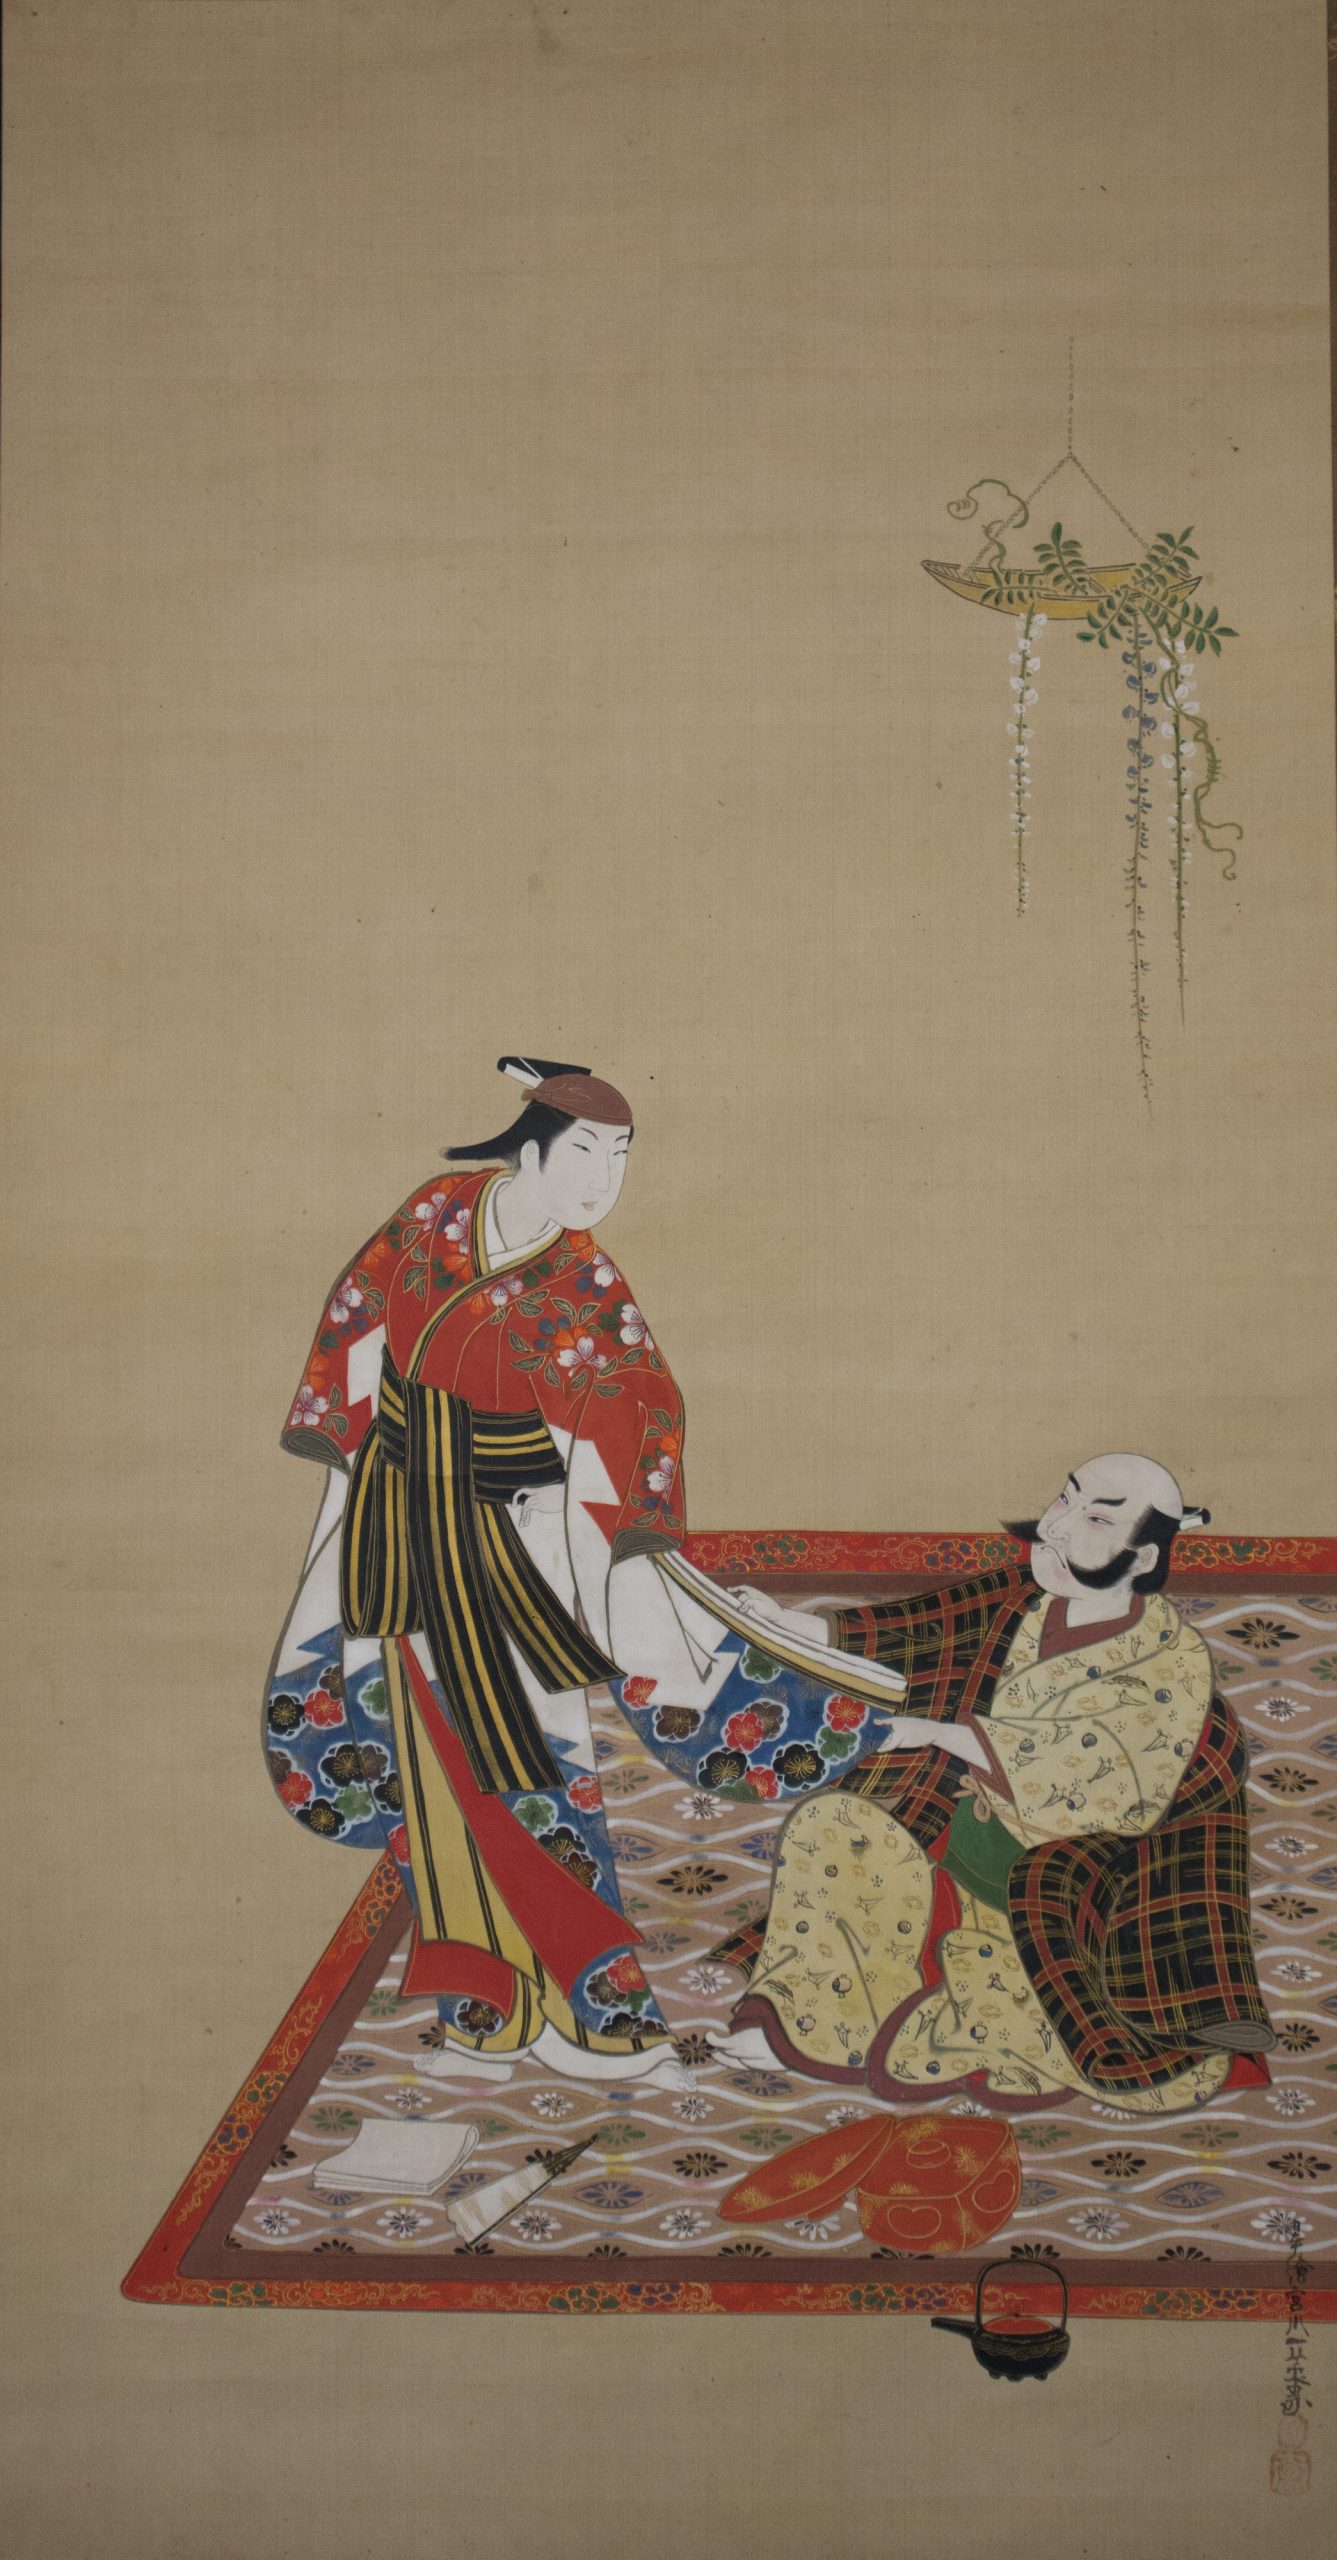 A Japanese painting of two figures, one holding the robe of the other.